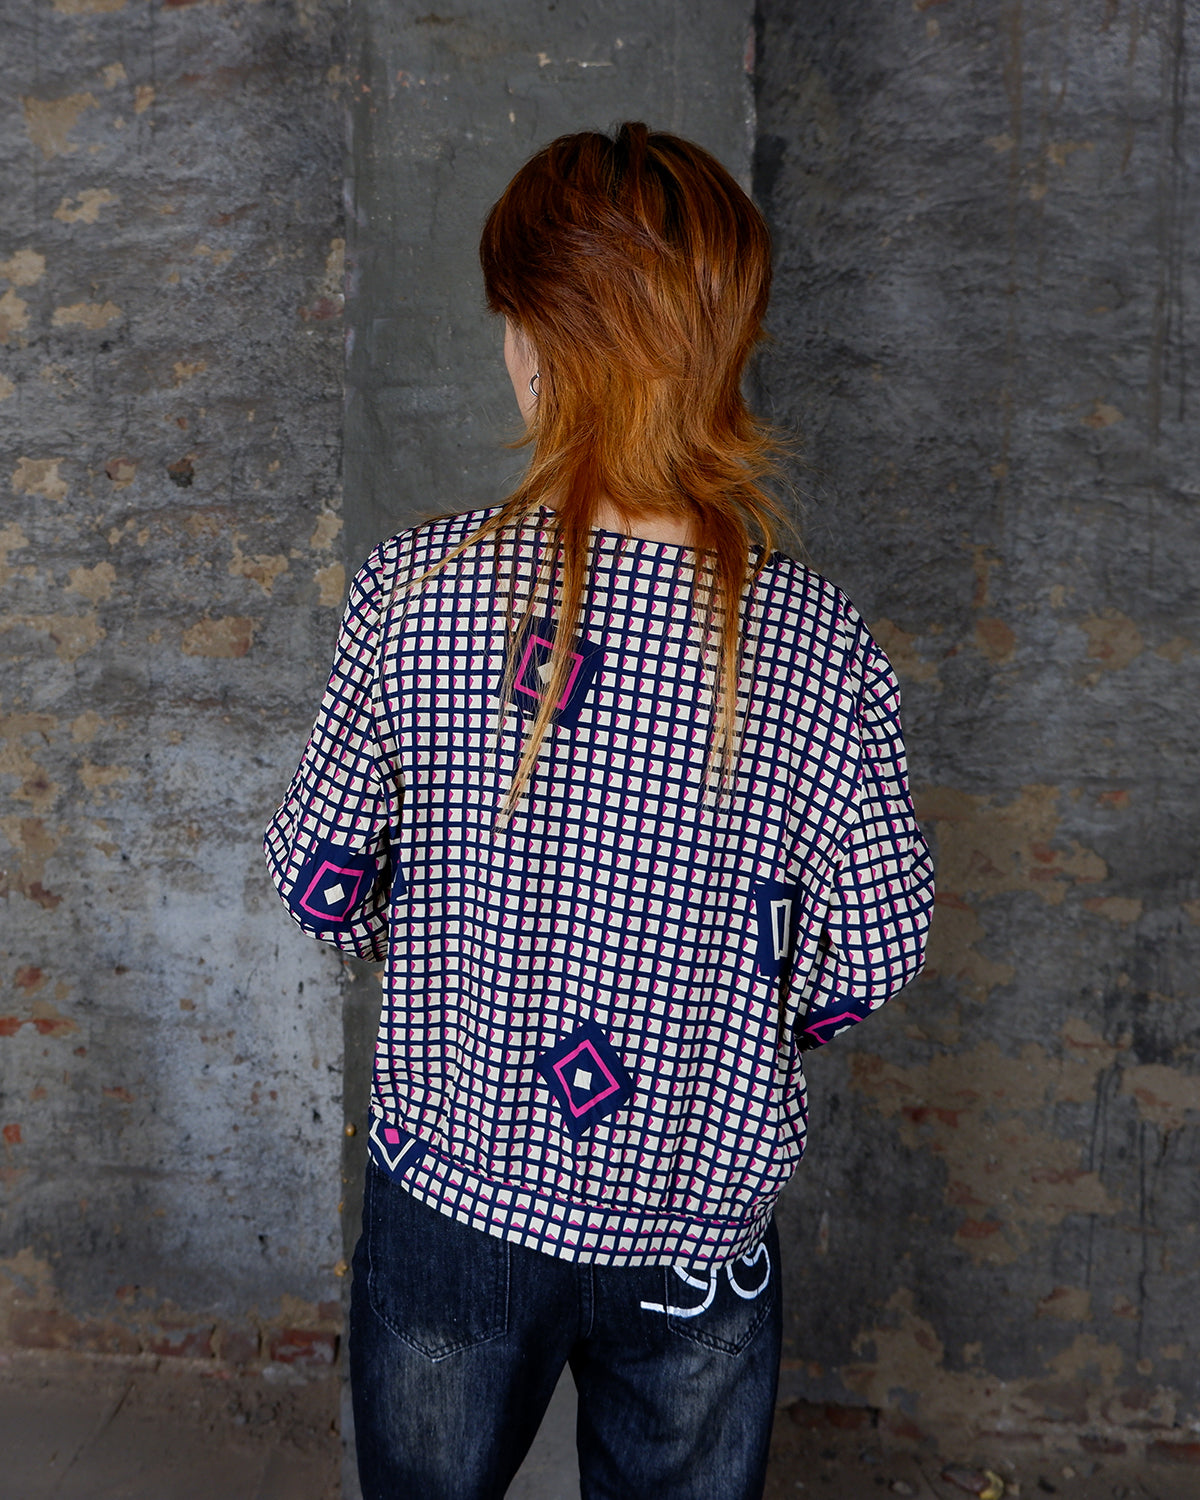 Say goodbye to boring blouses with this vintage 80s geometric masterpiece! Made from a luxurious silk mix, this blouse is a dream come true for those who love playful fashion.